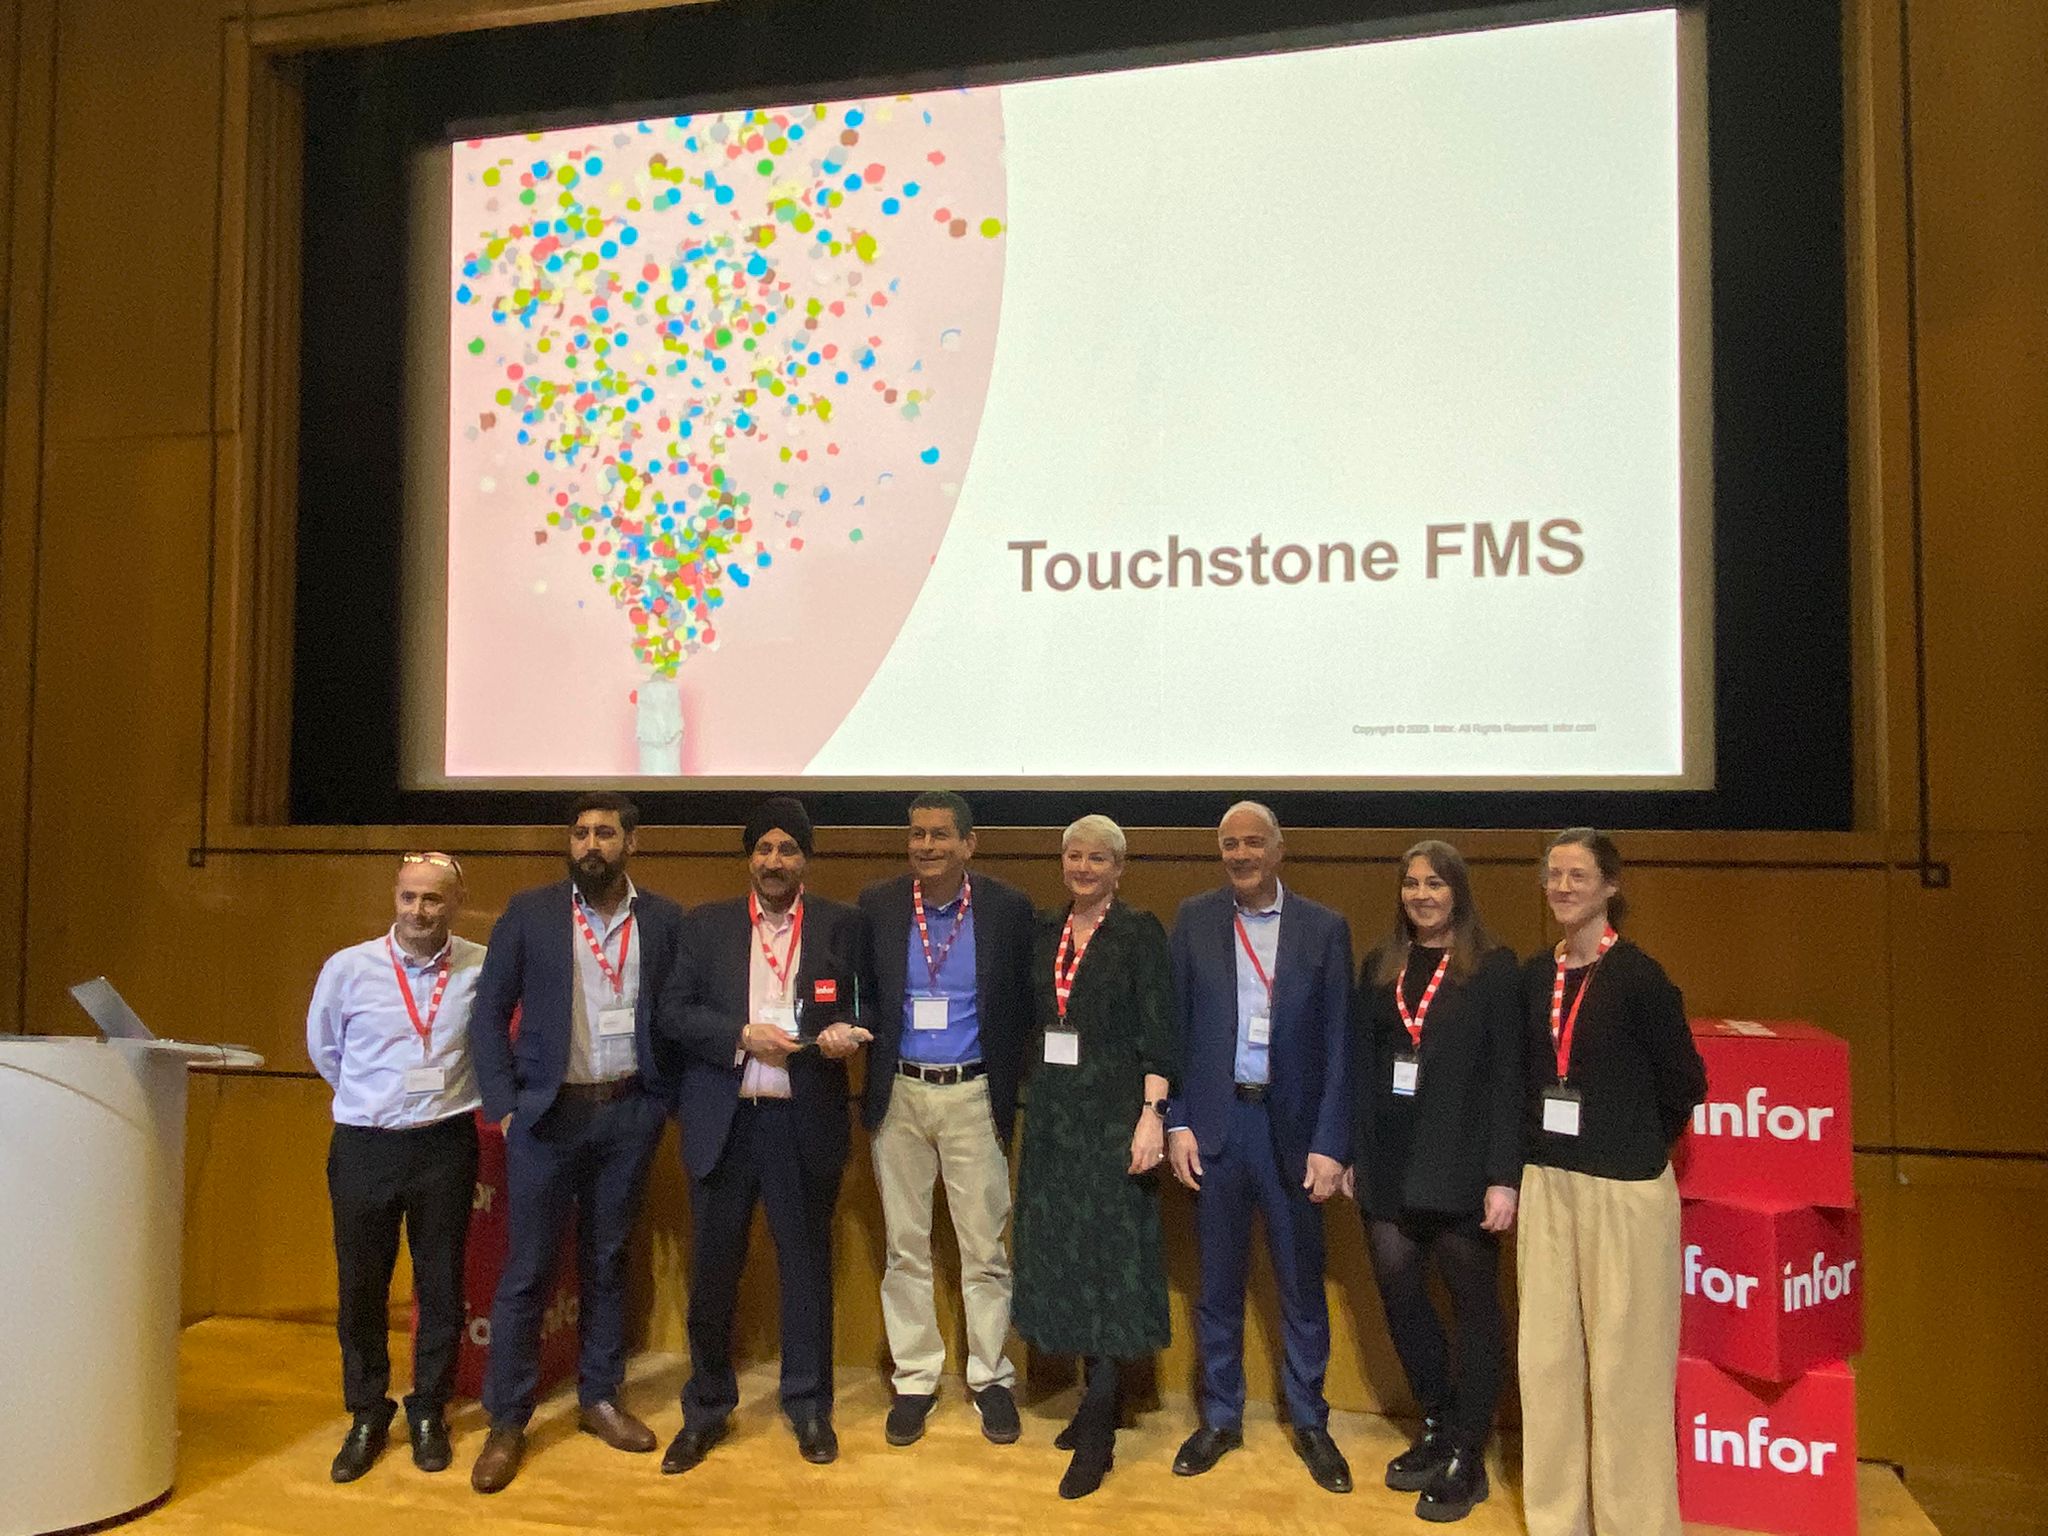 A group of people standing in front of a screen with the words Touchstone FMS.